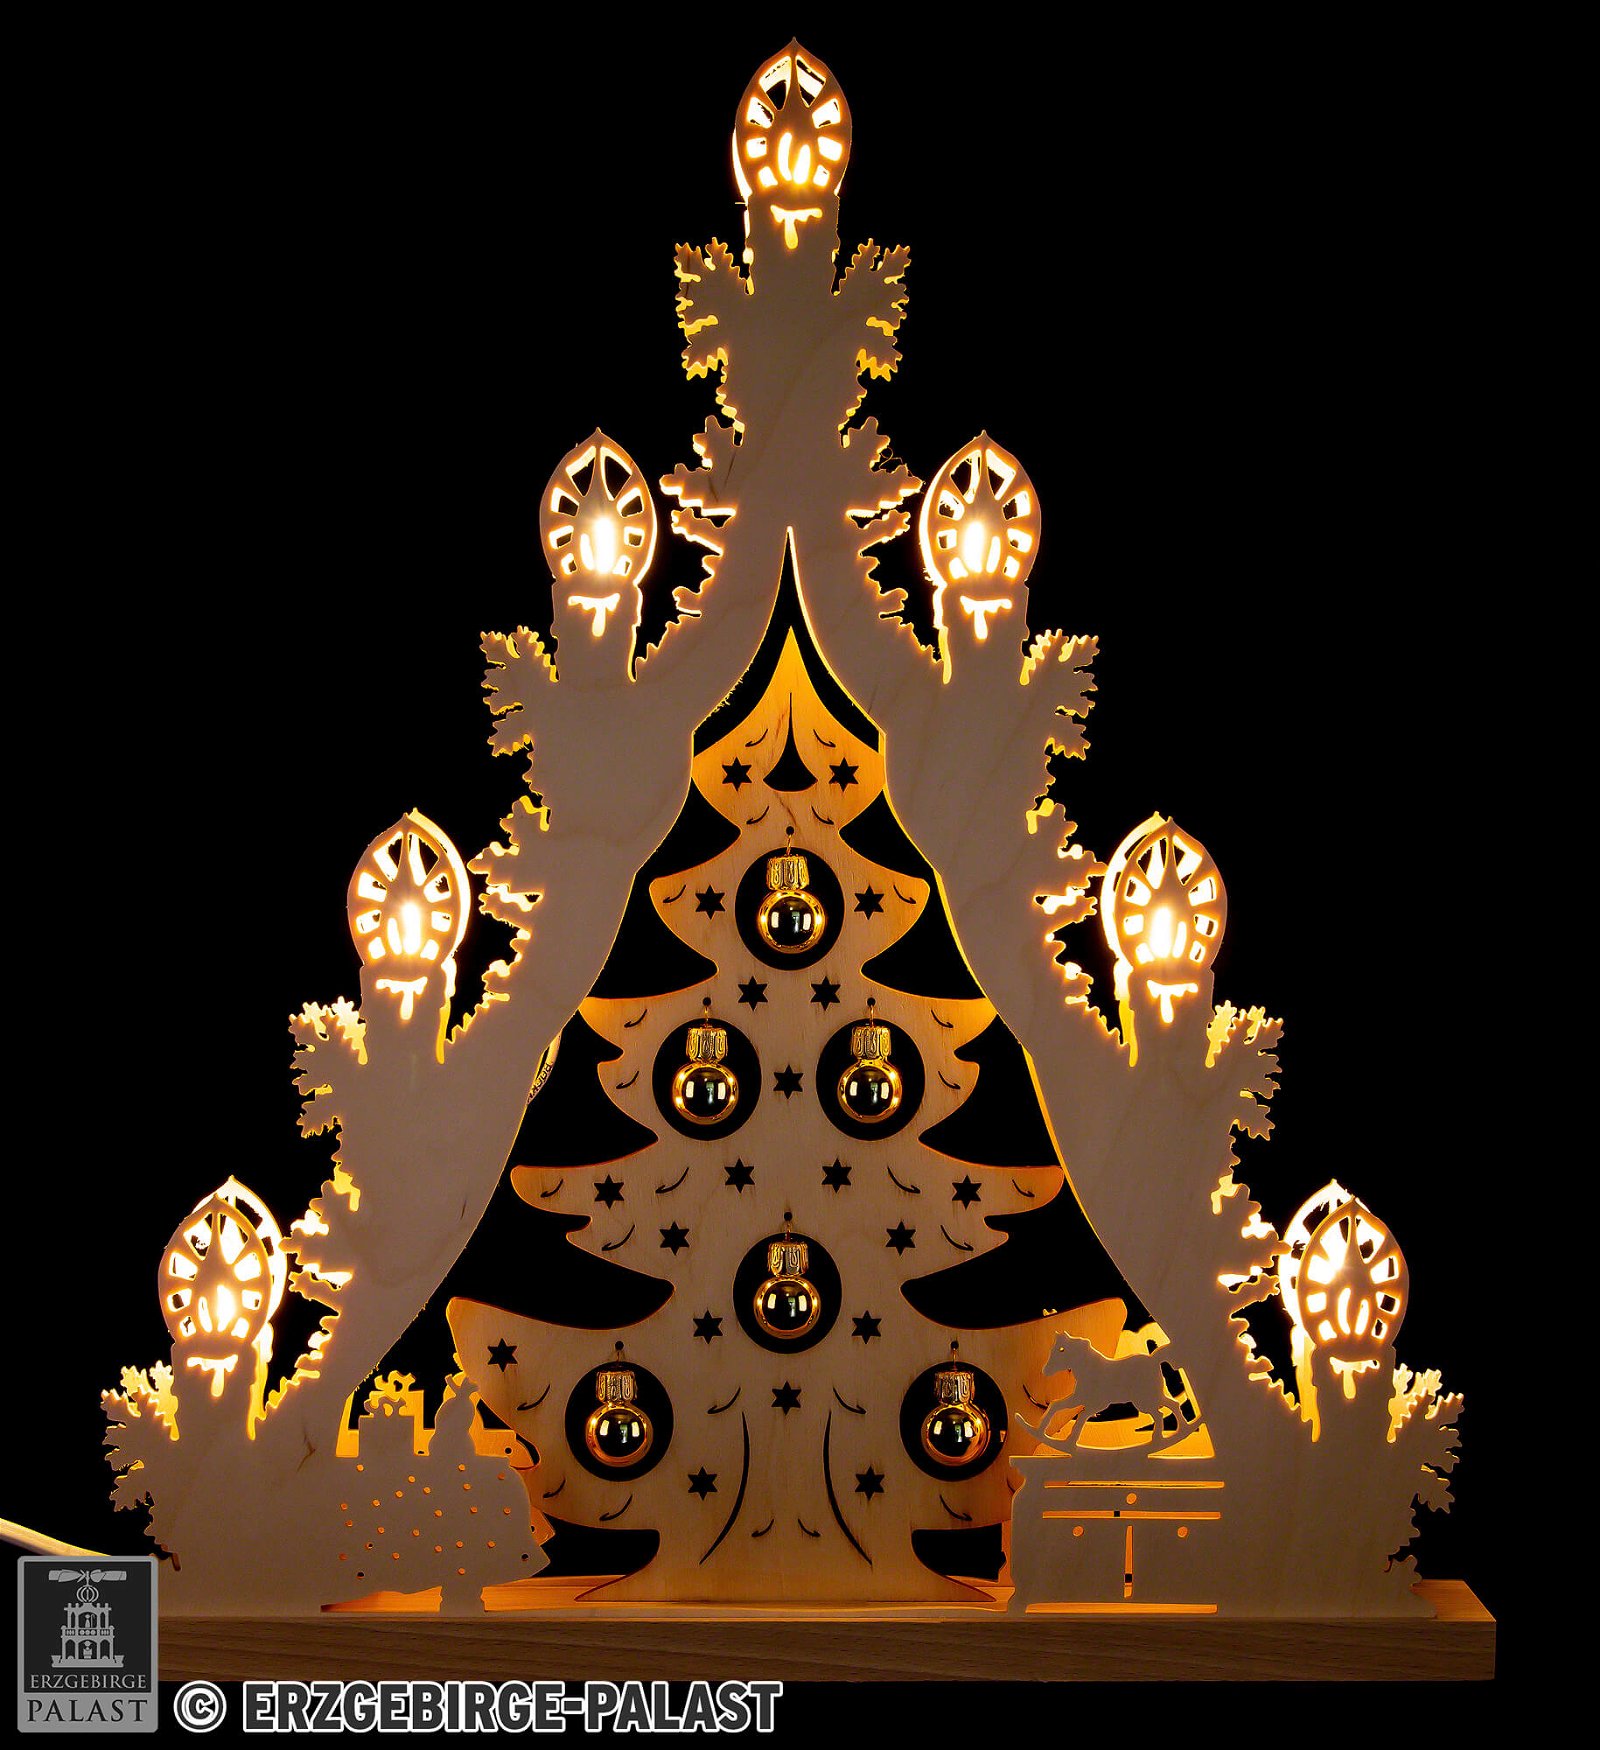 Light Triangle “Christmas Tree with Golden (38×44 Baubles” Weigla cm/15×17.3in) Holzkunst by